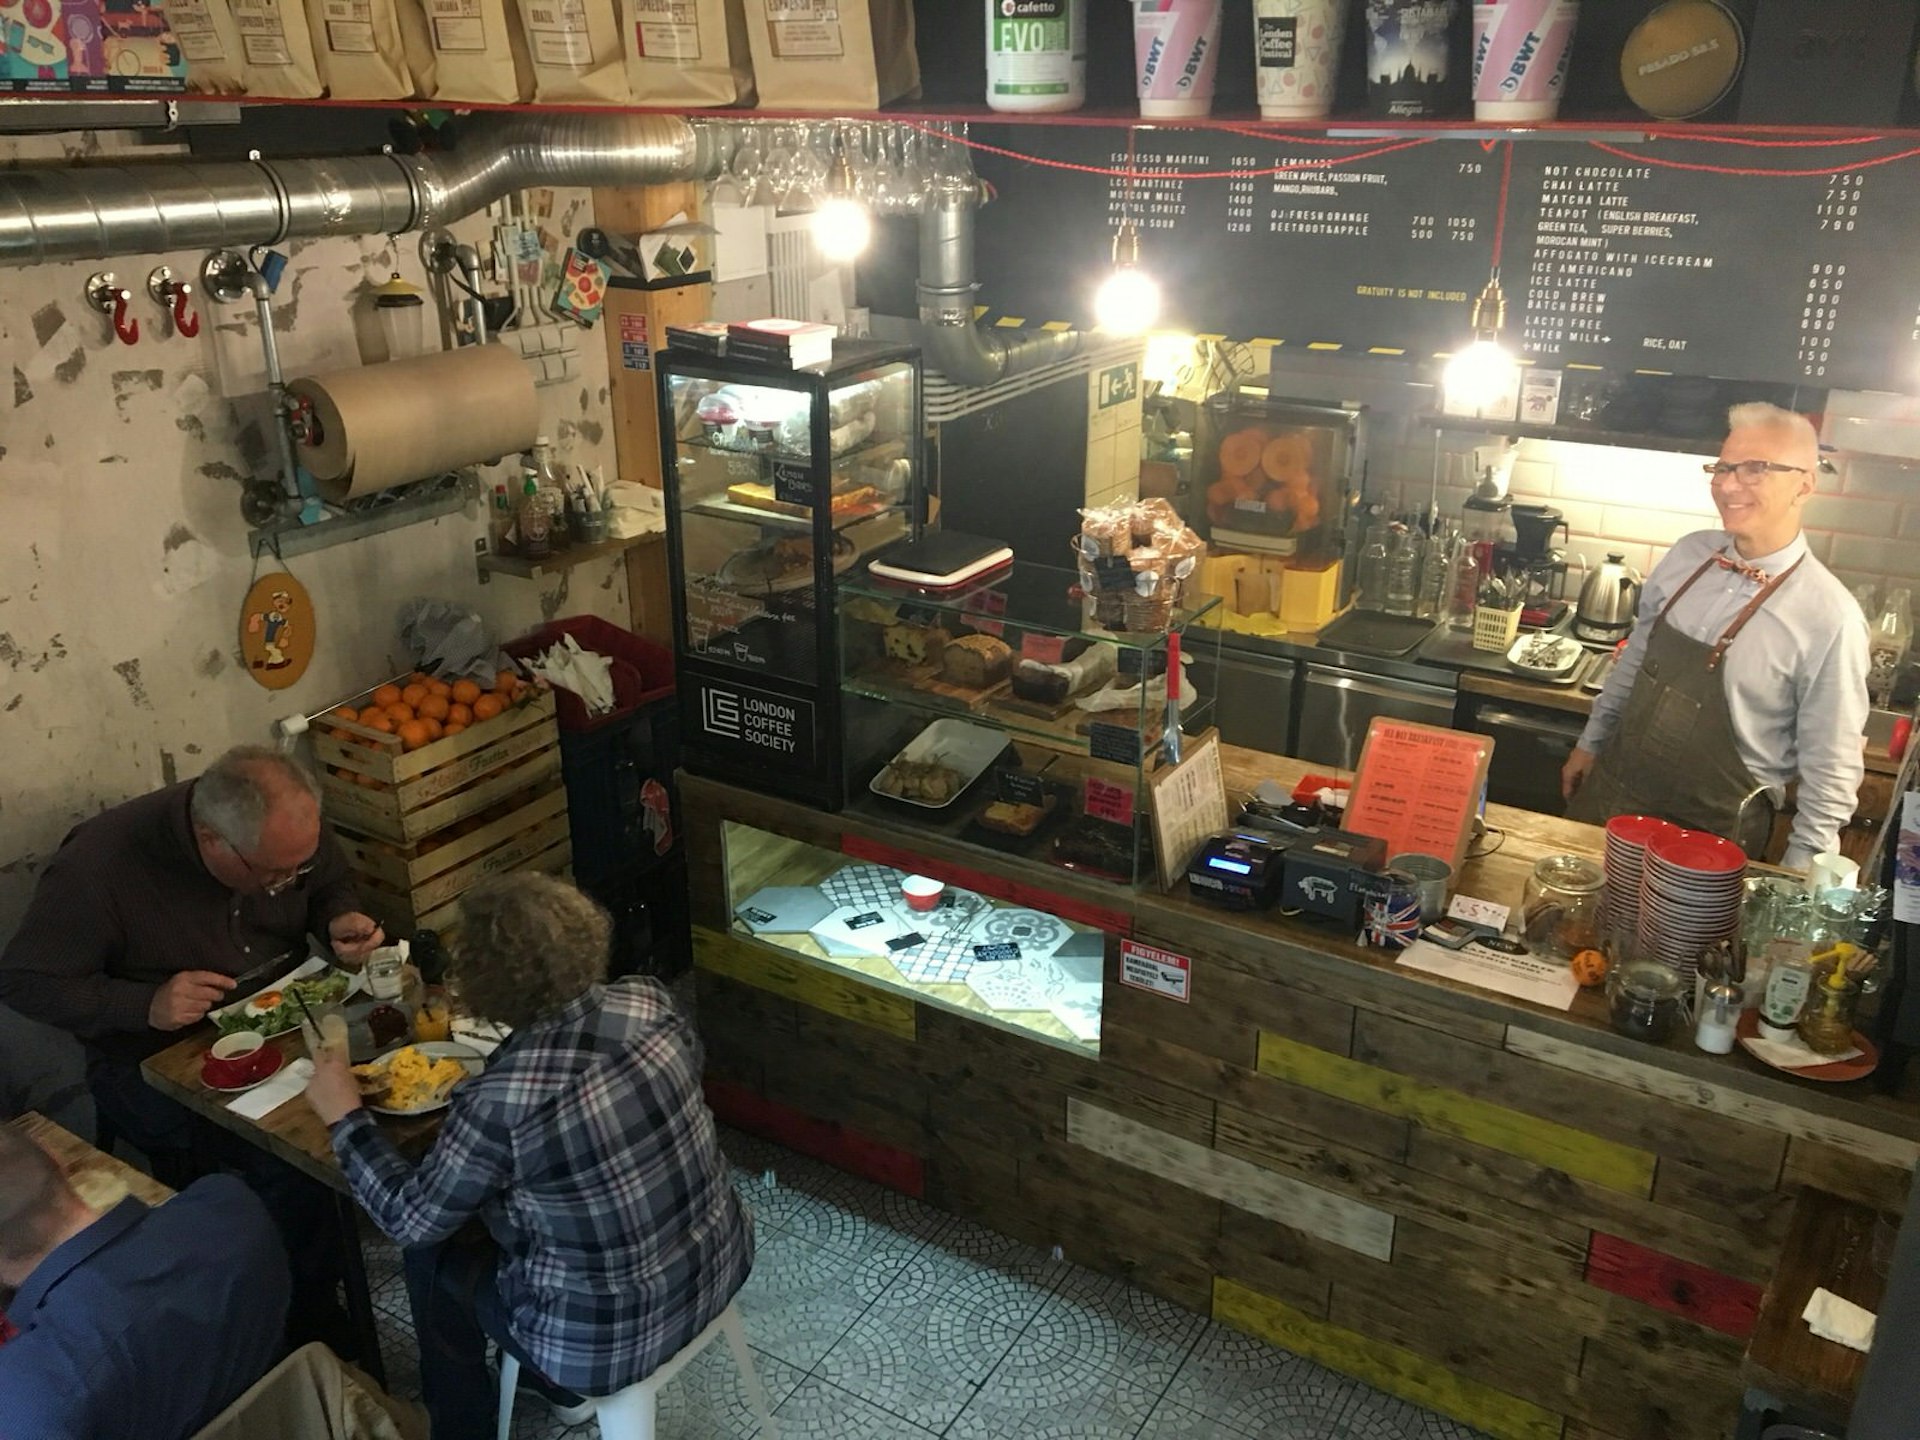 Looking down at the front counter of London Coffee Society from a mezzanine, a man behind the counter is smiling broadly while customers dine on their Budapest brunch